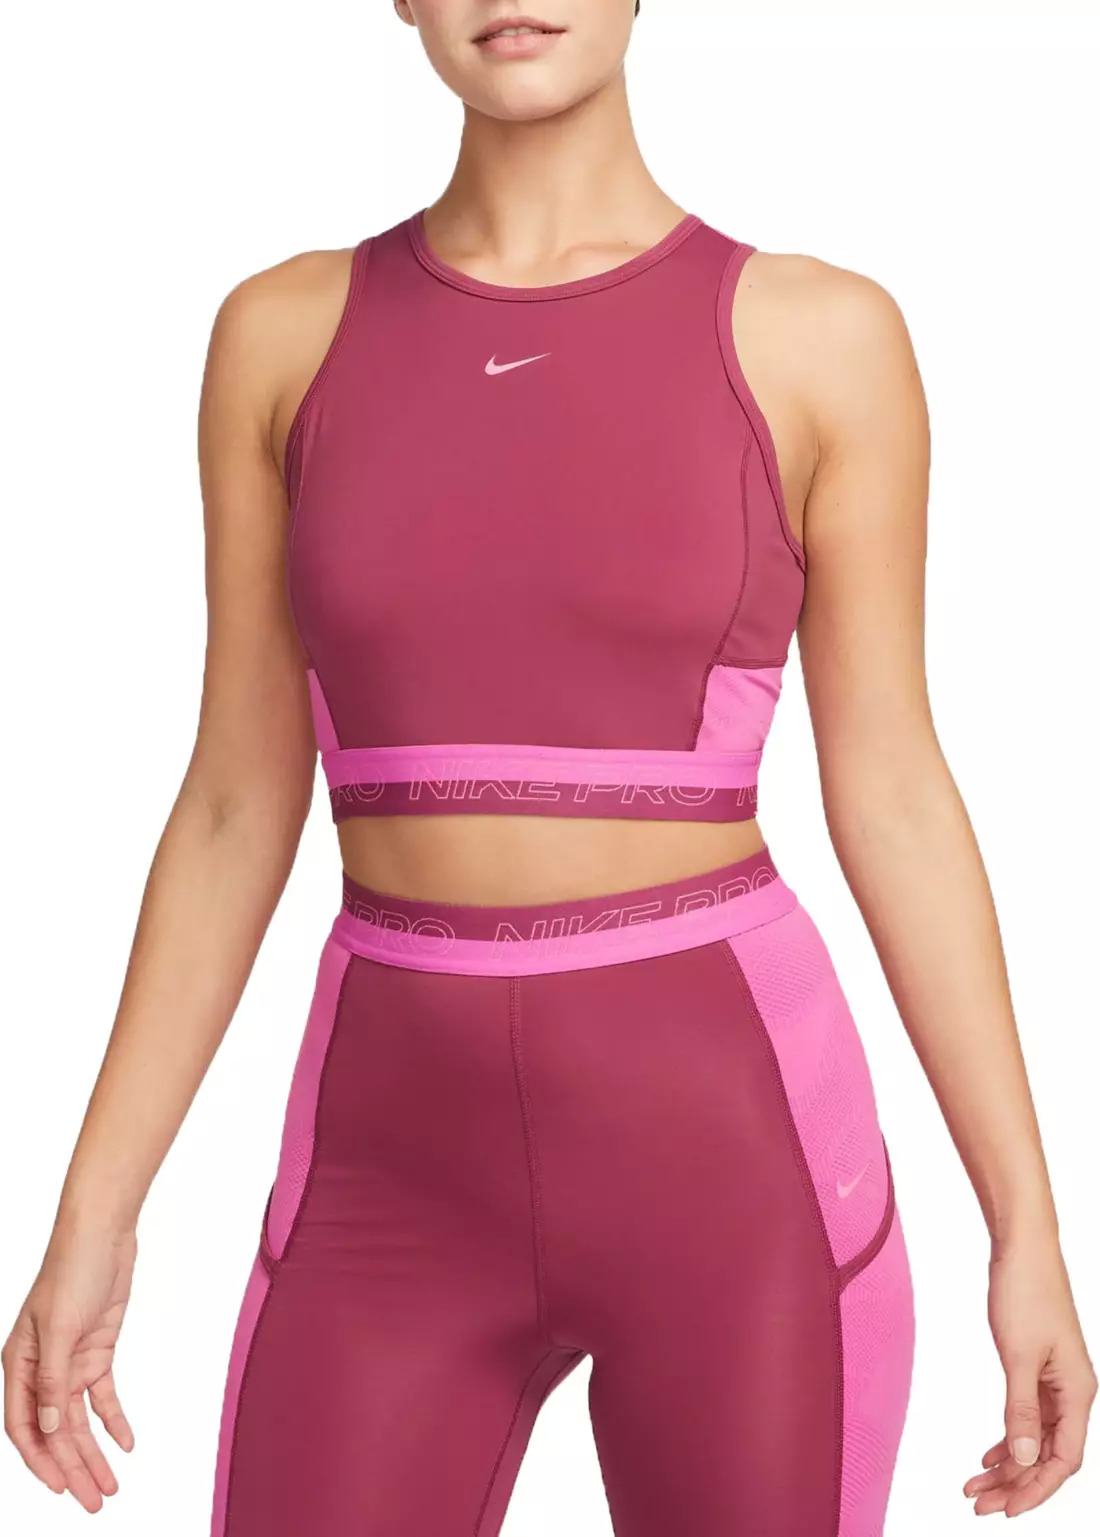 Nike Women's Pro Dri-FIT Femme Cropped Tank Top (Rosewood, Size S-XXL) $10.47 + Free Shipping on $49+ or Free Store PU at Dick's Sporting Goods